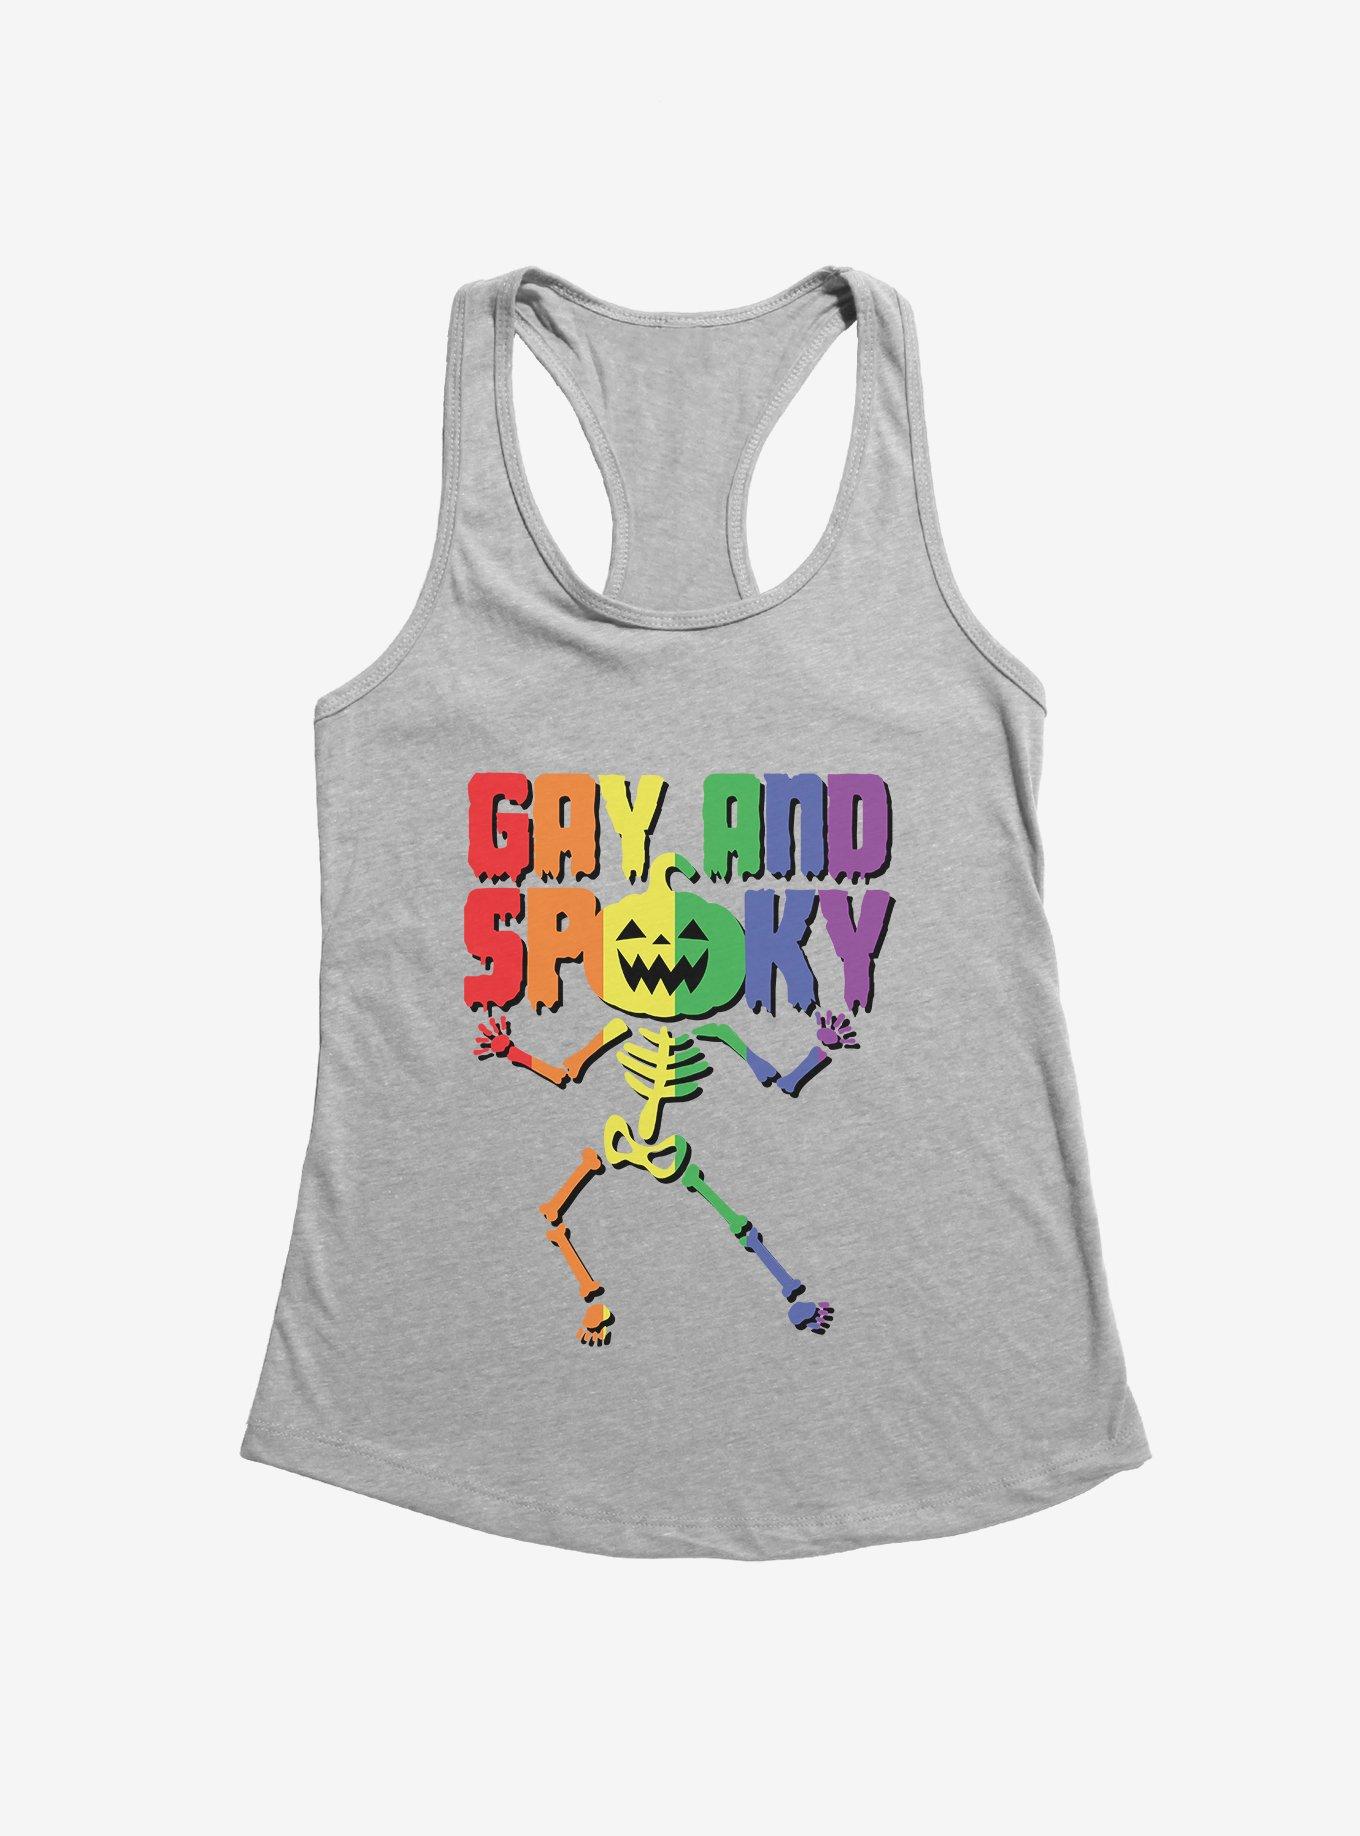 Hot Topic Rainbow Gay And Spooky Skeleton Girls Tank